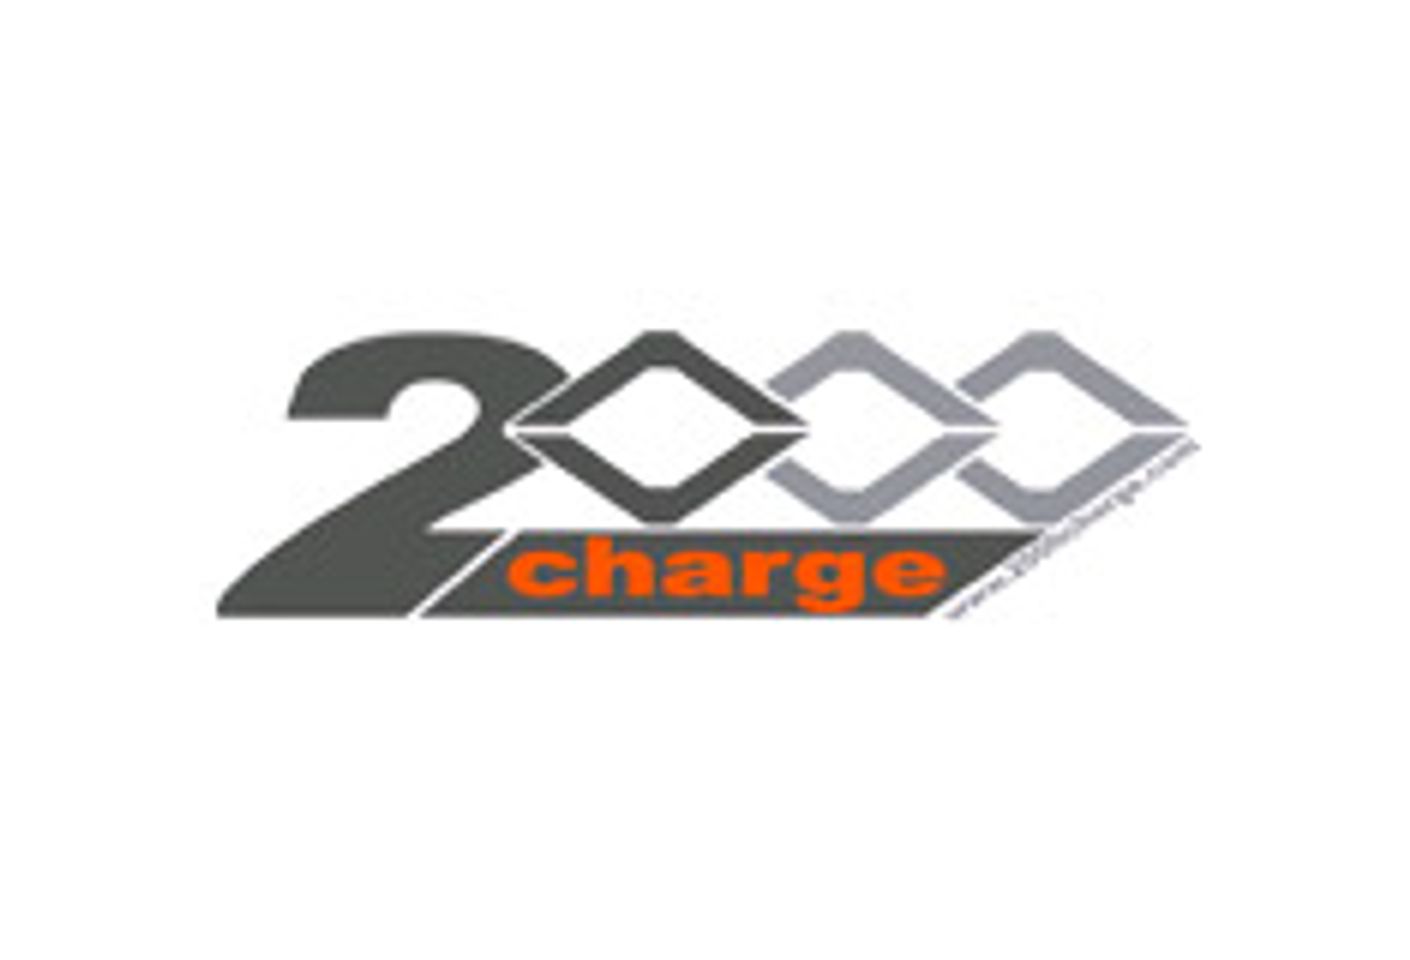 2000Charge Opens Asian Marketplace to Online Merchants